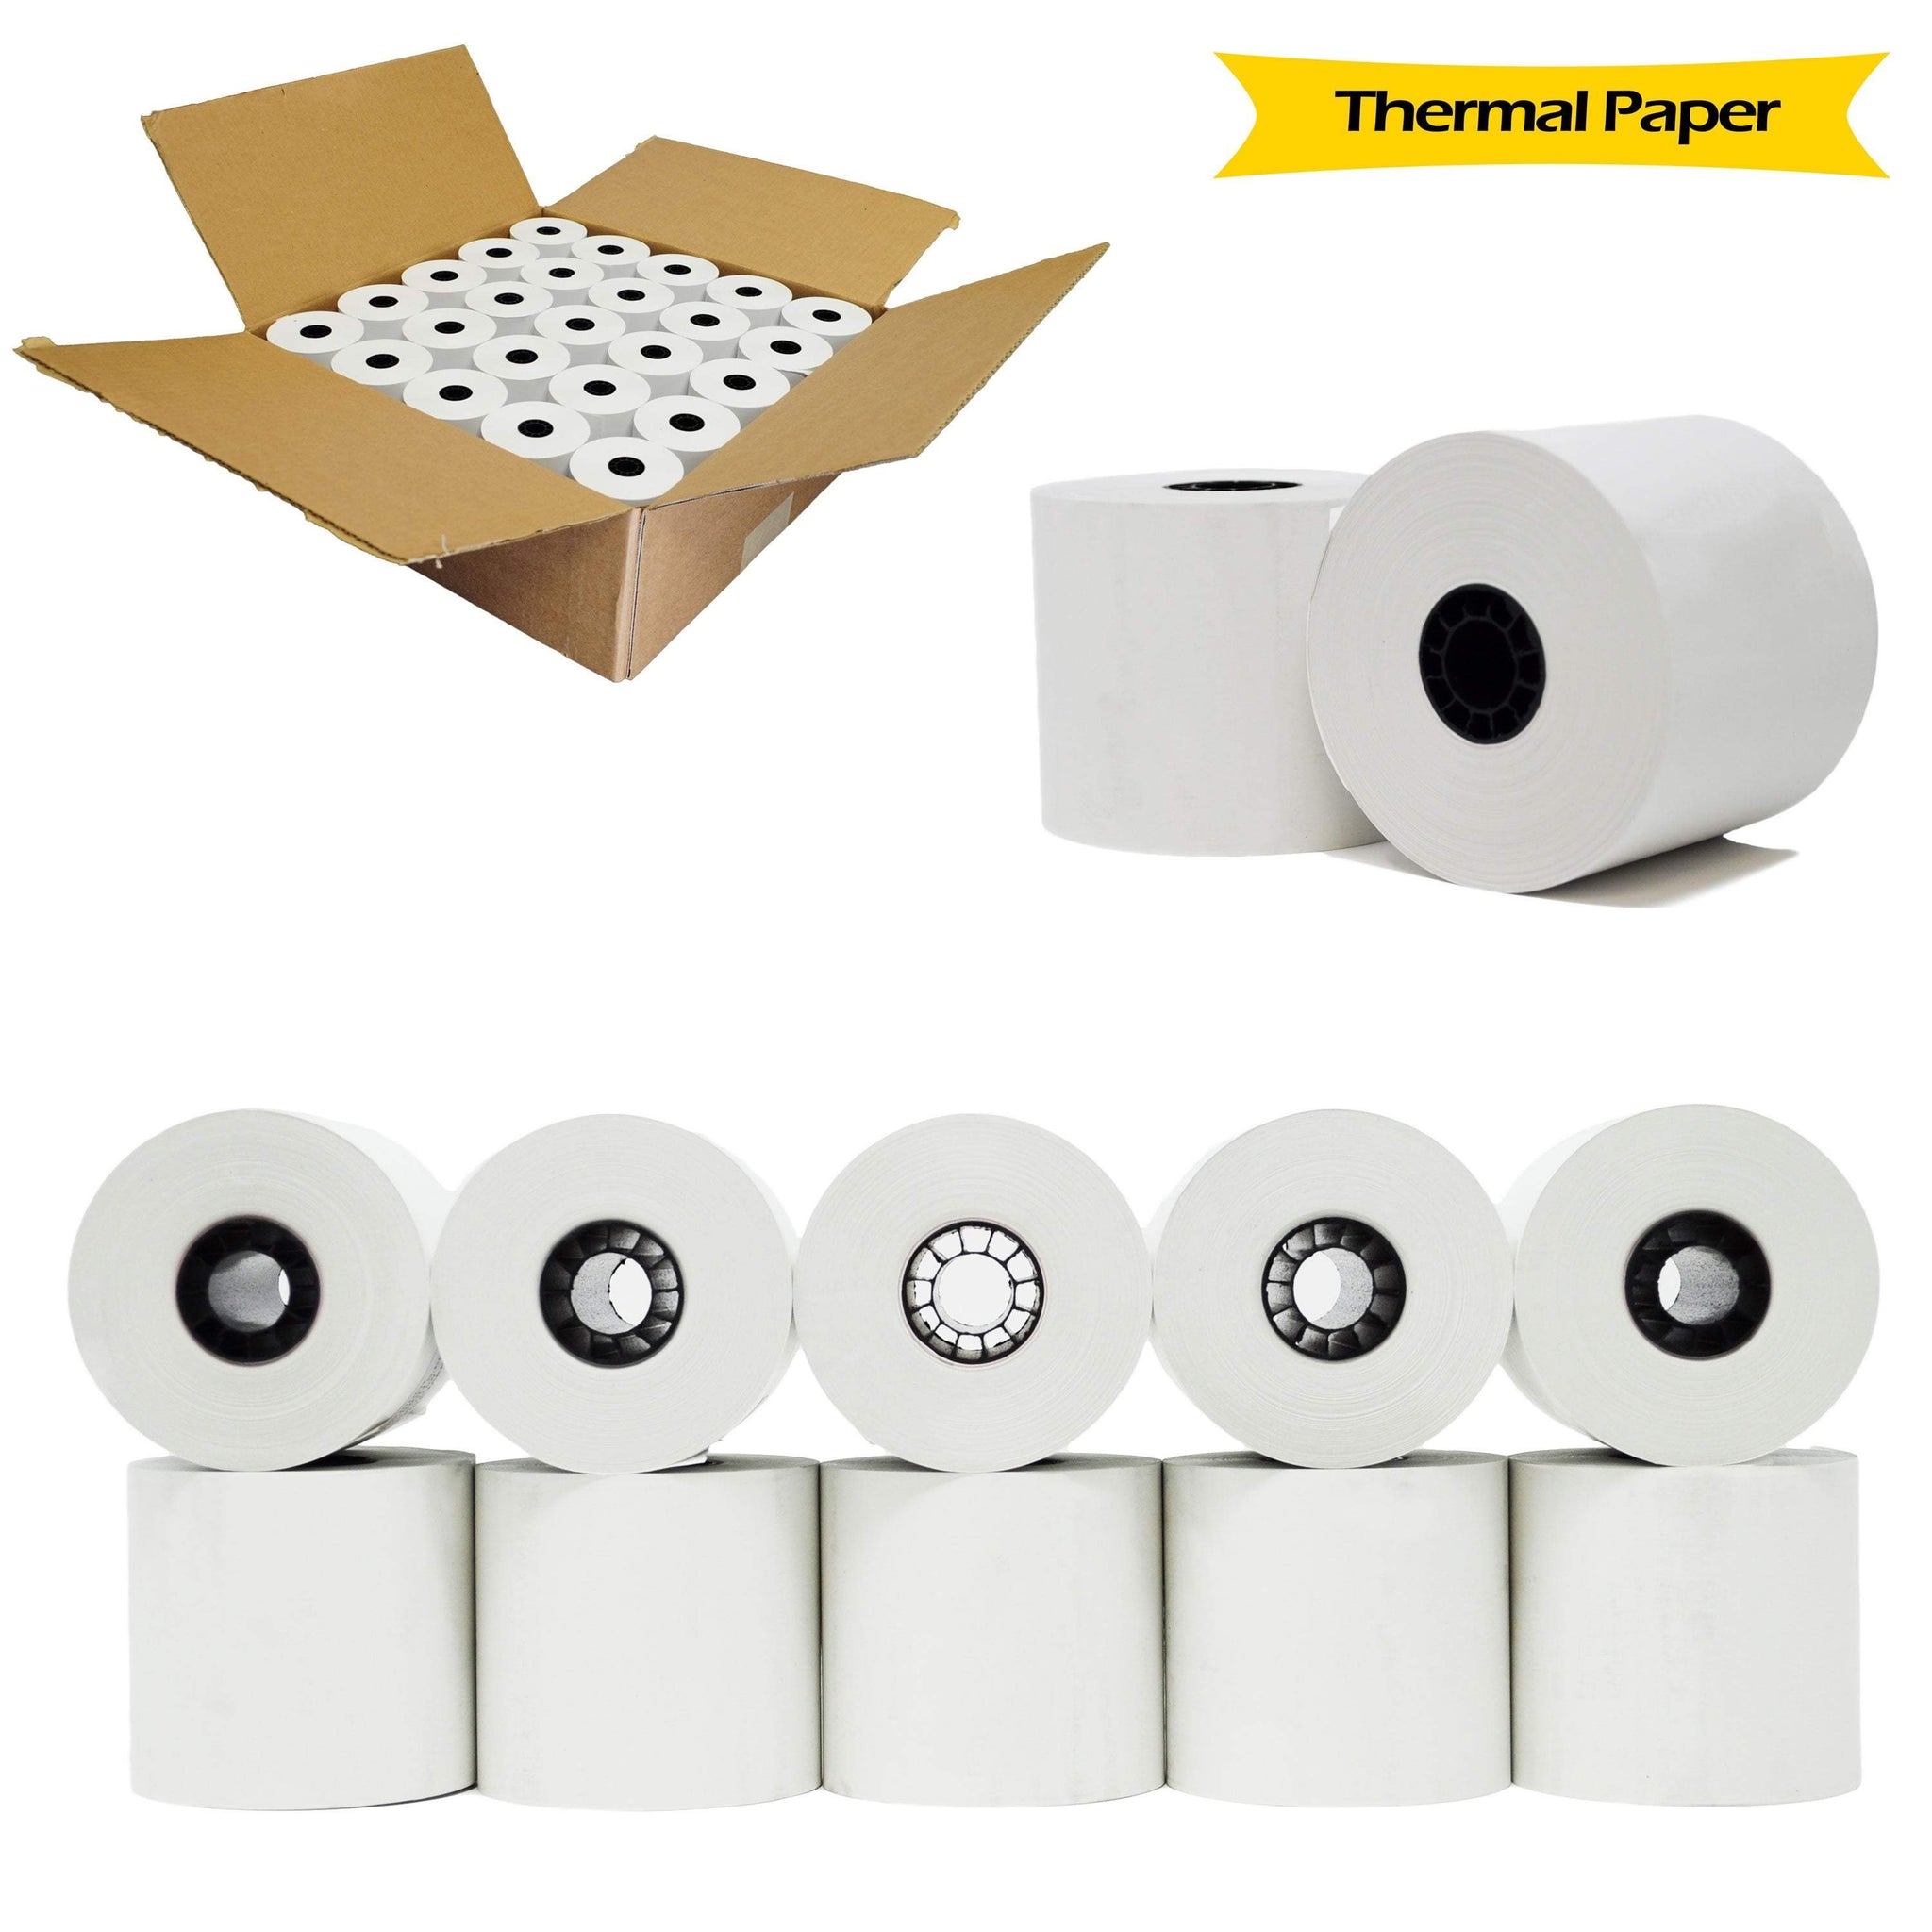 Extra Large Verifone VX520 Thermal Paper Rolls 2 1/4 x 70